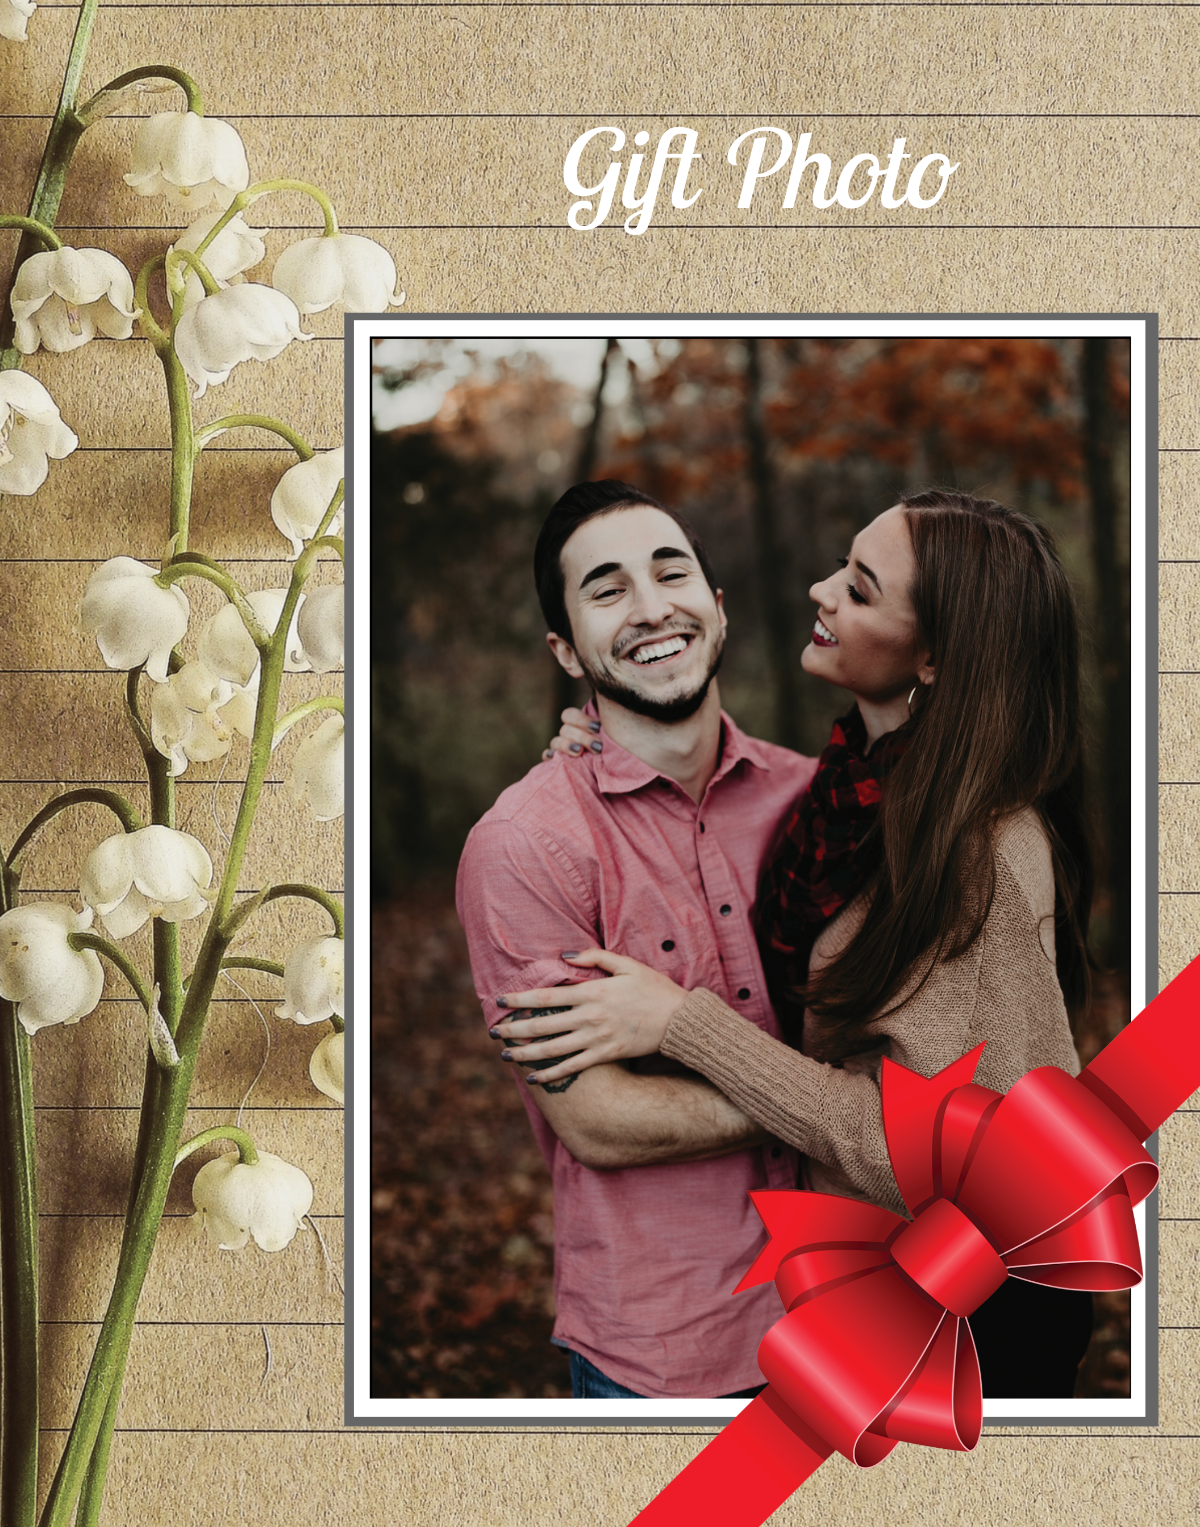 Gift Photo Frame Template